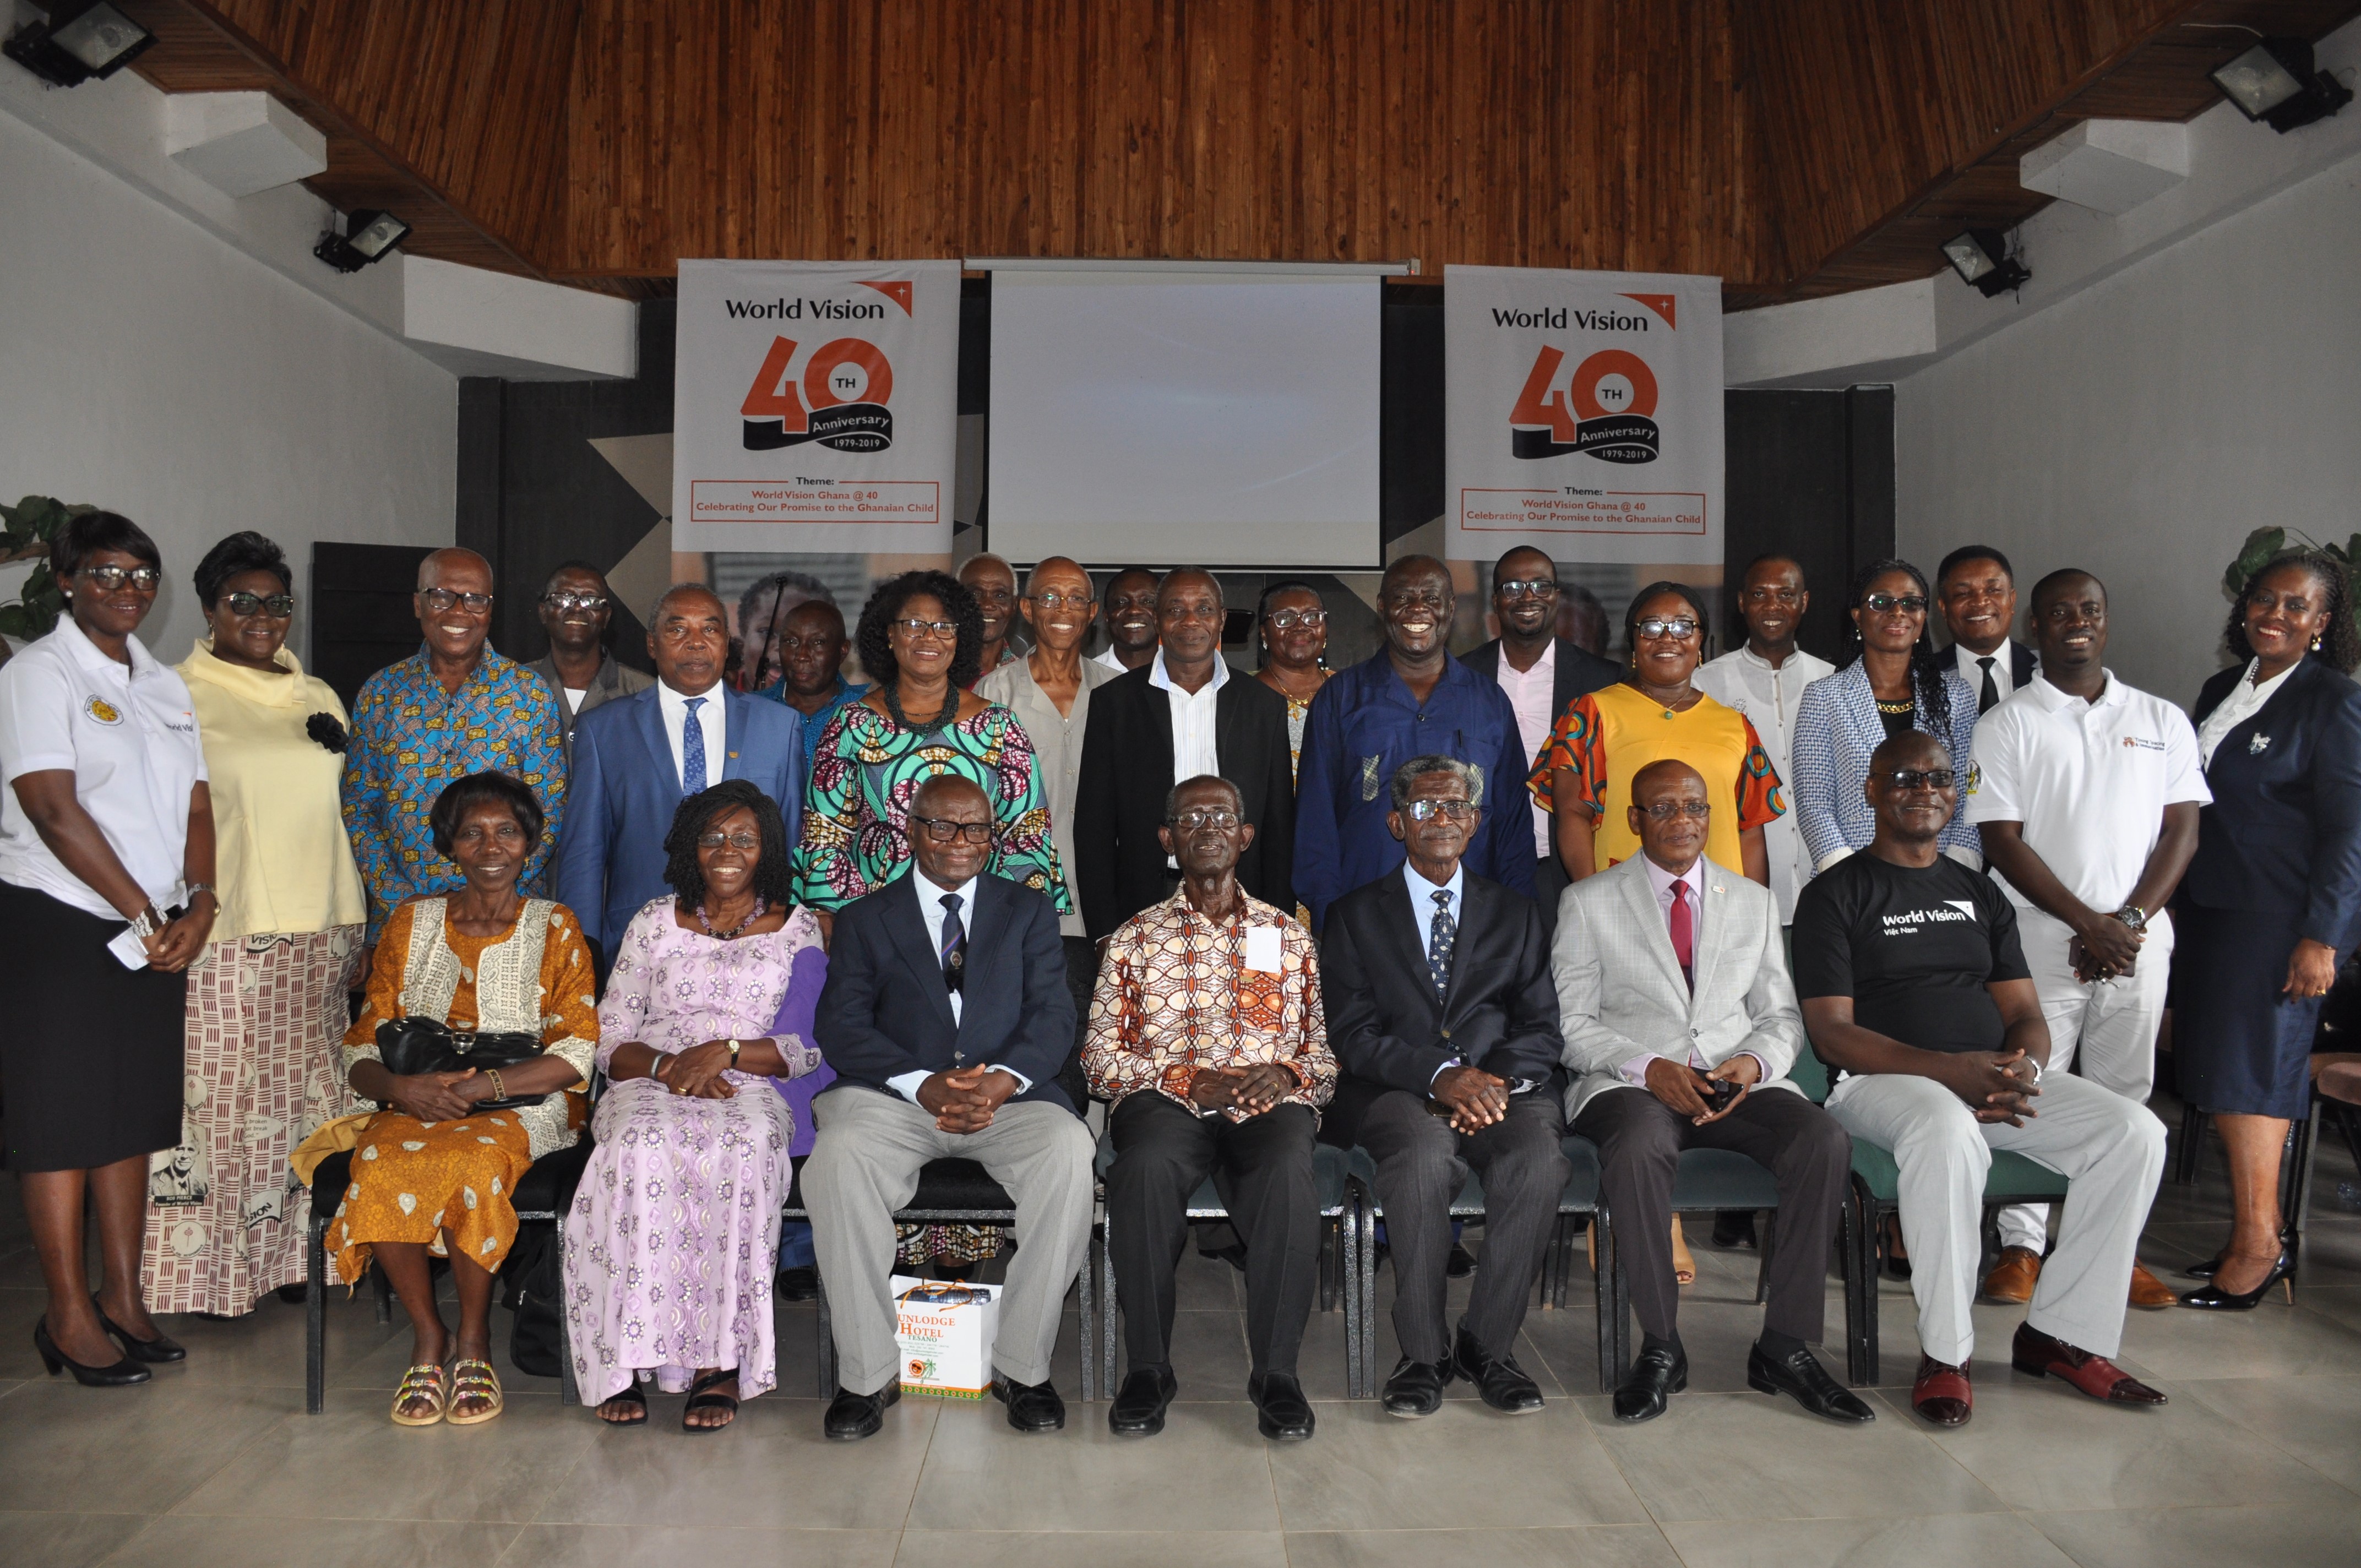 Past and present National Directors, advisory council members, board members and other executives